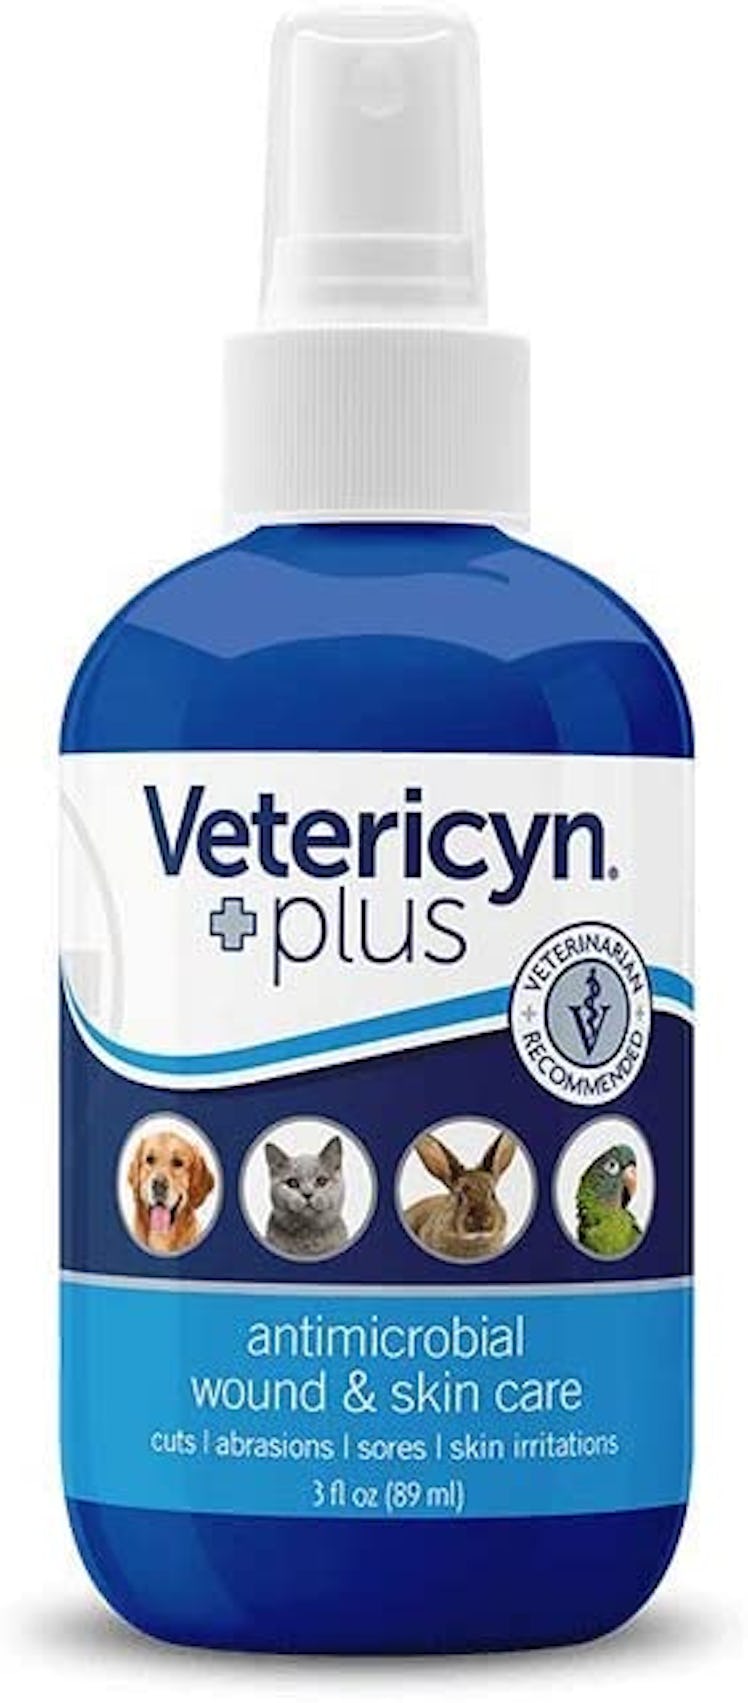 Vetericyn Wound and Skin-Care Spray